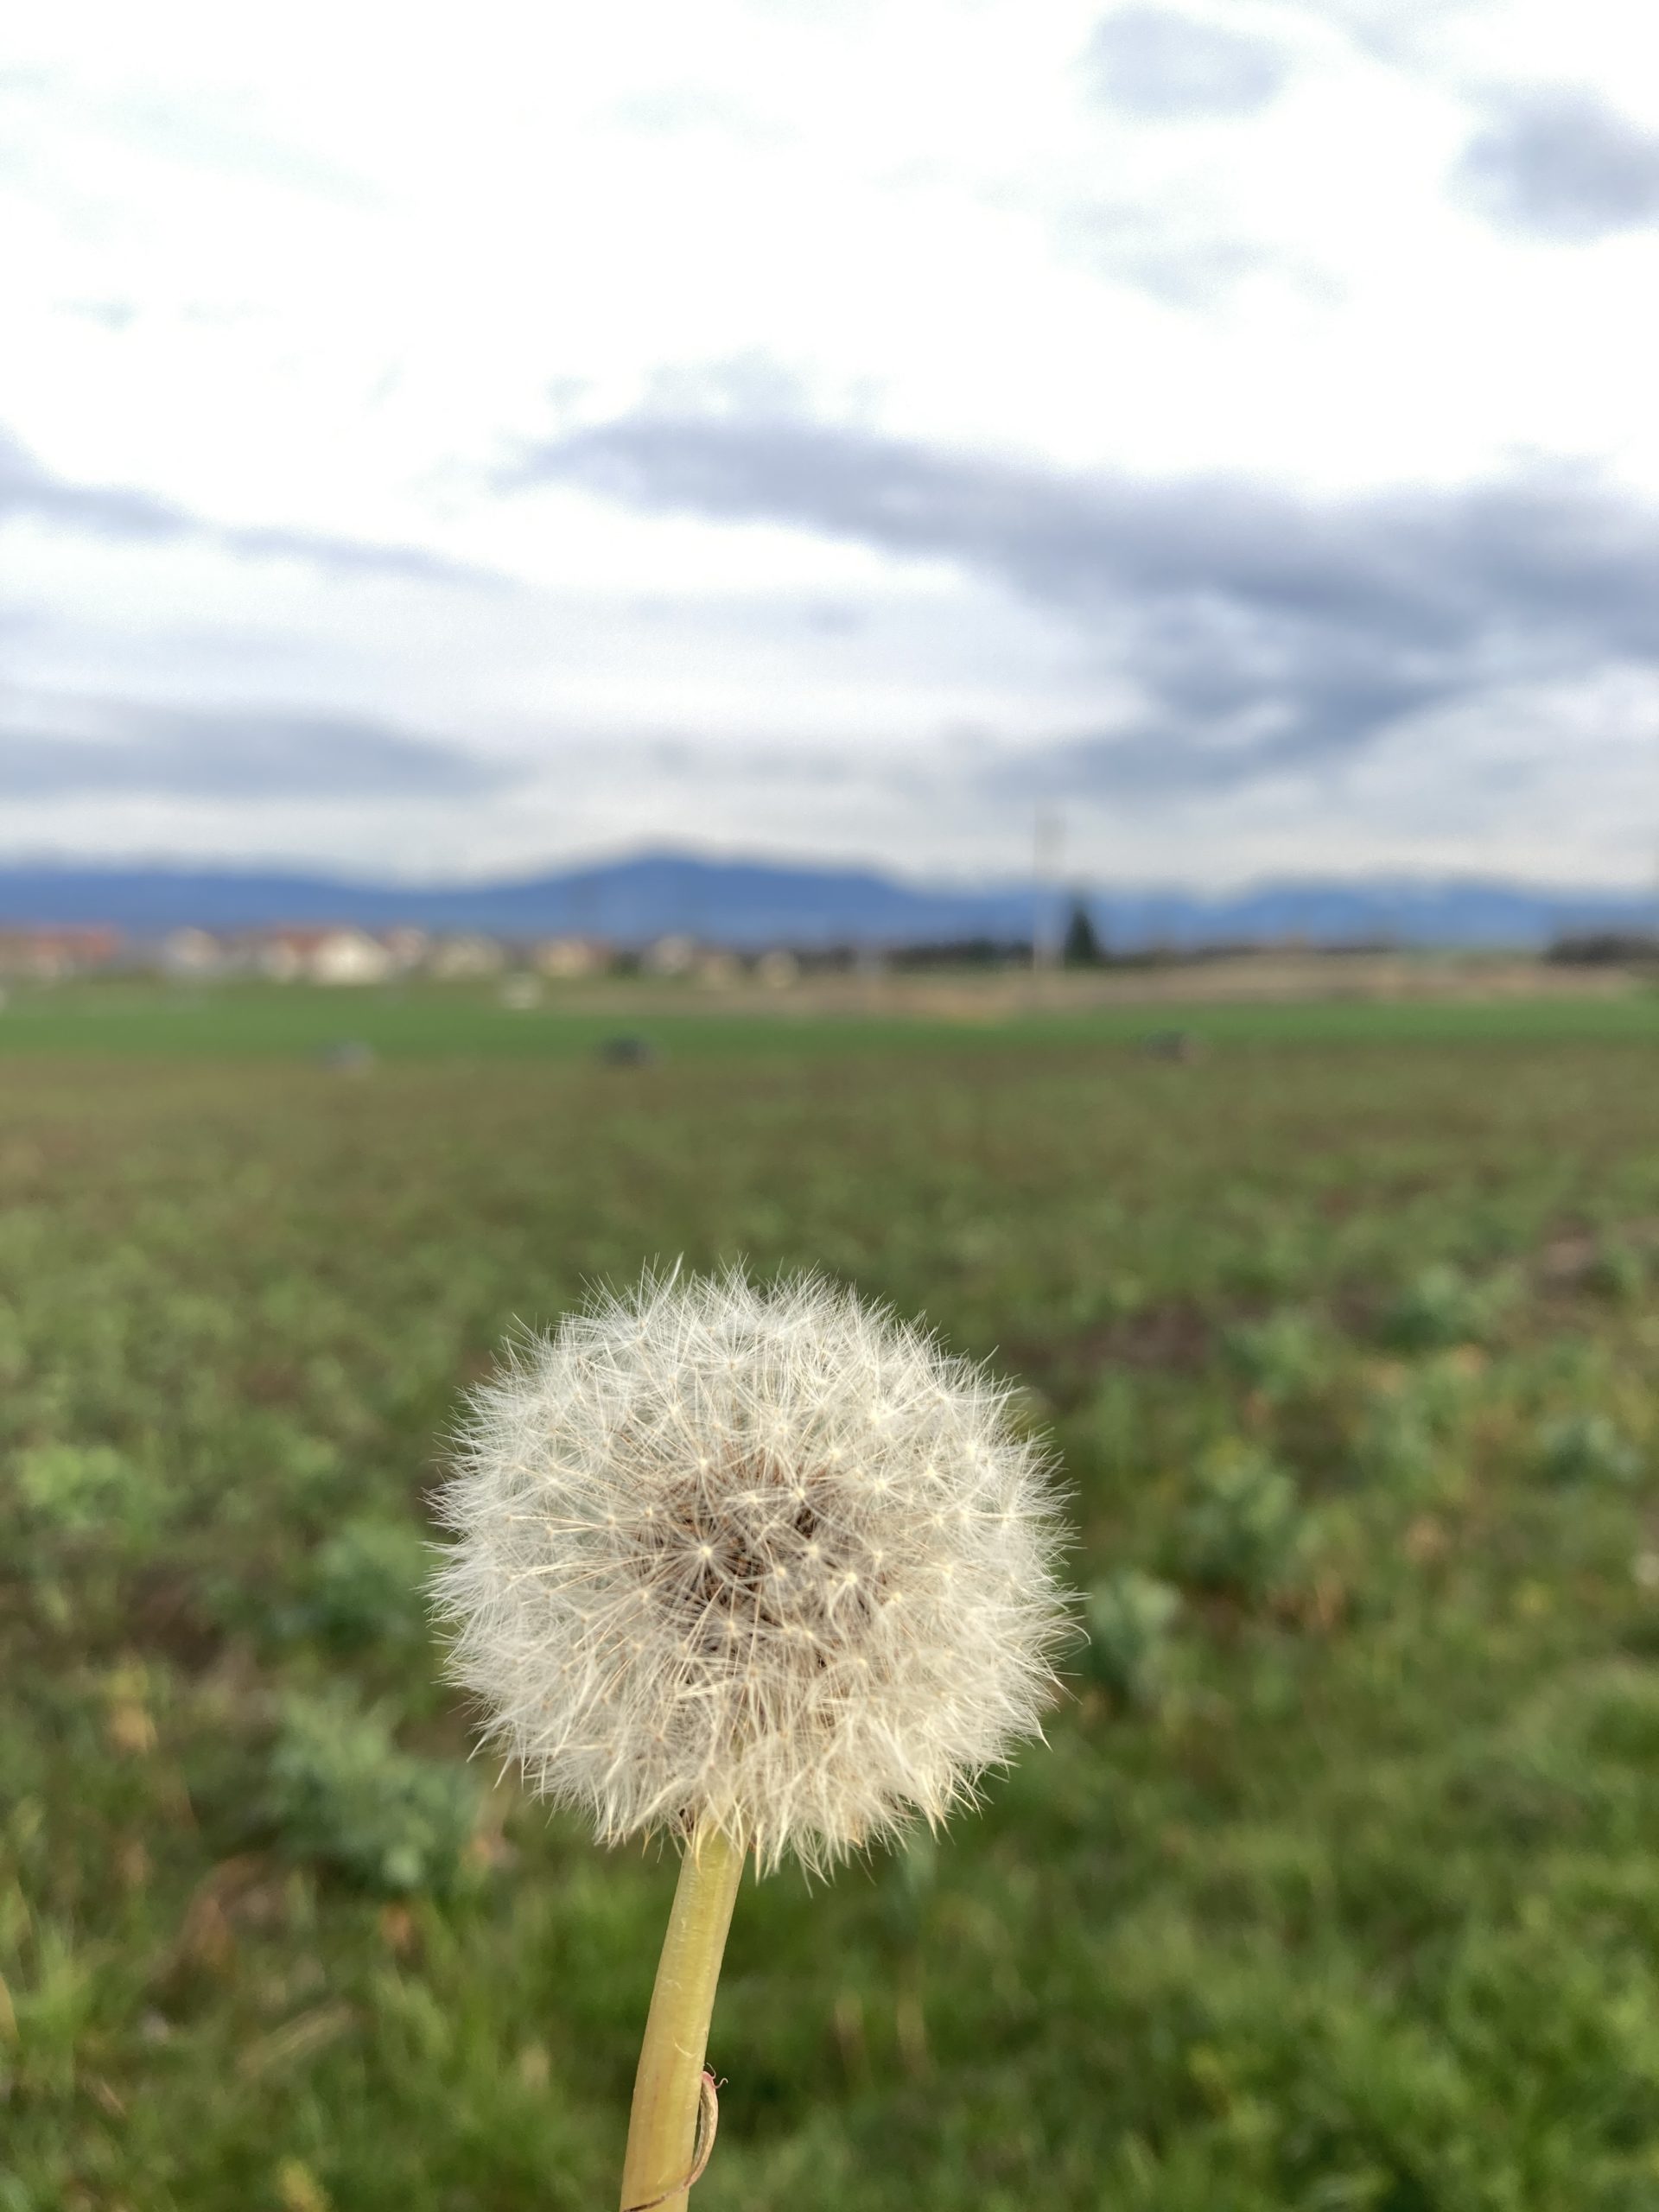 Dandelion with a blurred green field behind it